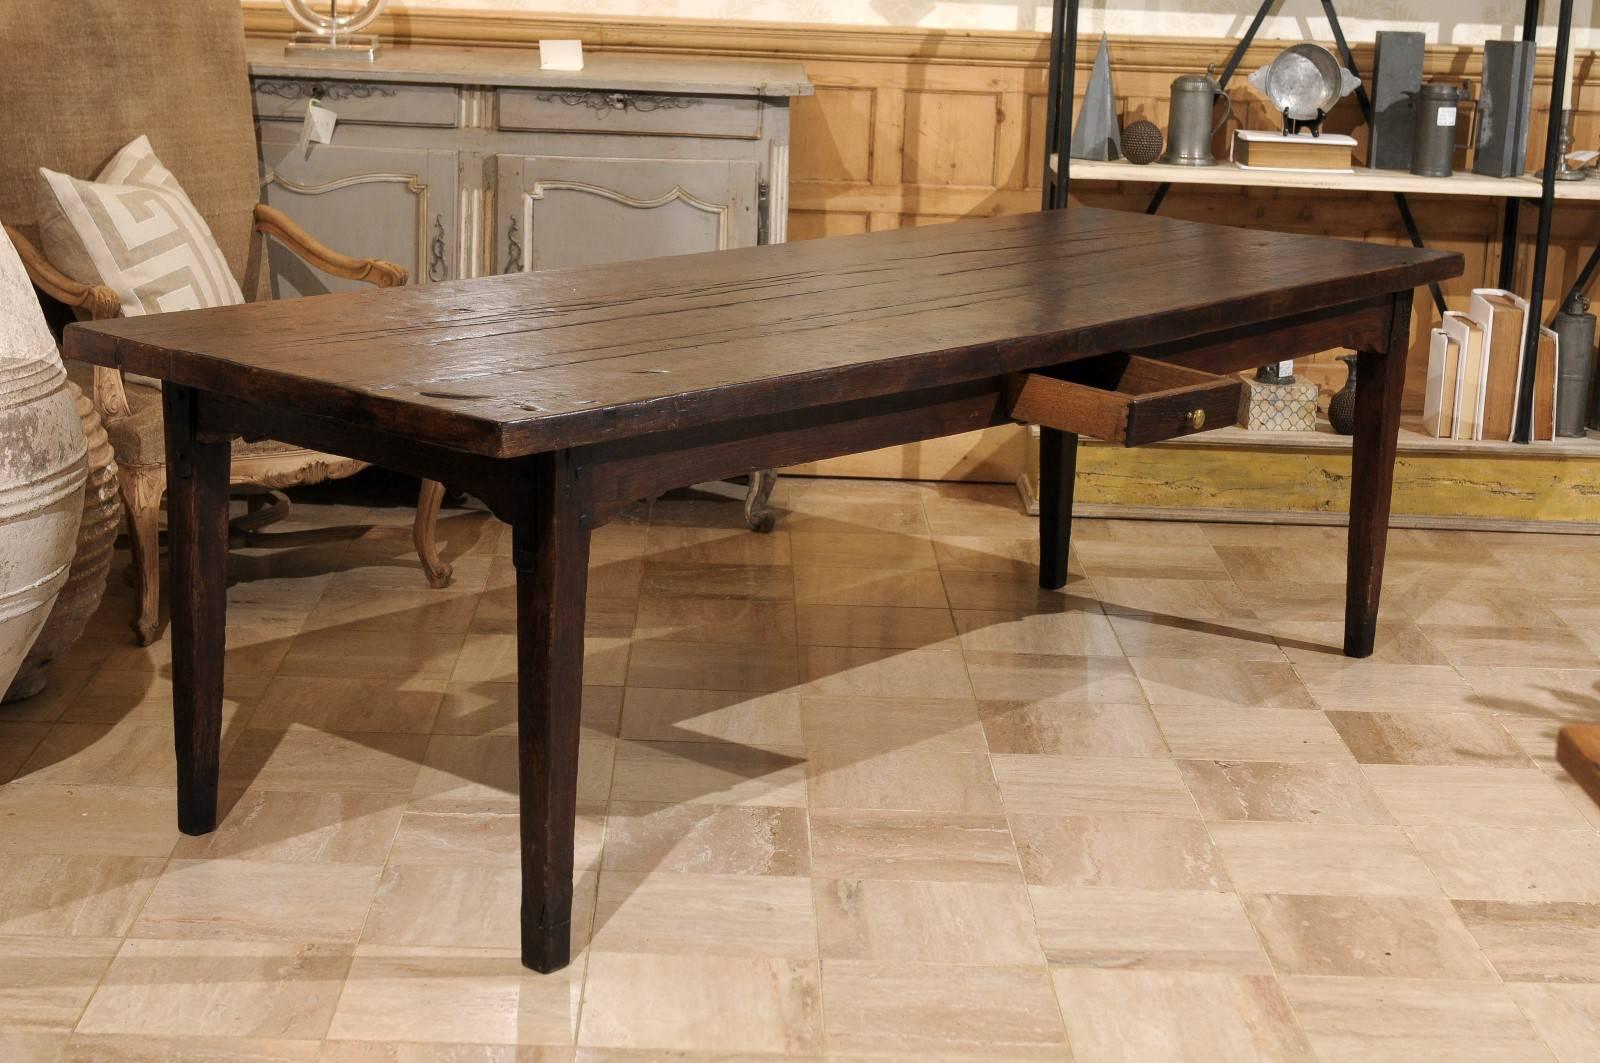 What an interesting French farm table. I like the thickness of the top and the distressing which gives it a more rustic feel. To add to the interest, there are heavy decorative iron pieces on each leg. The apron holds two working drawers and one